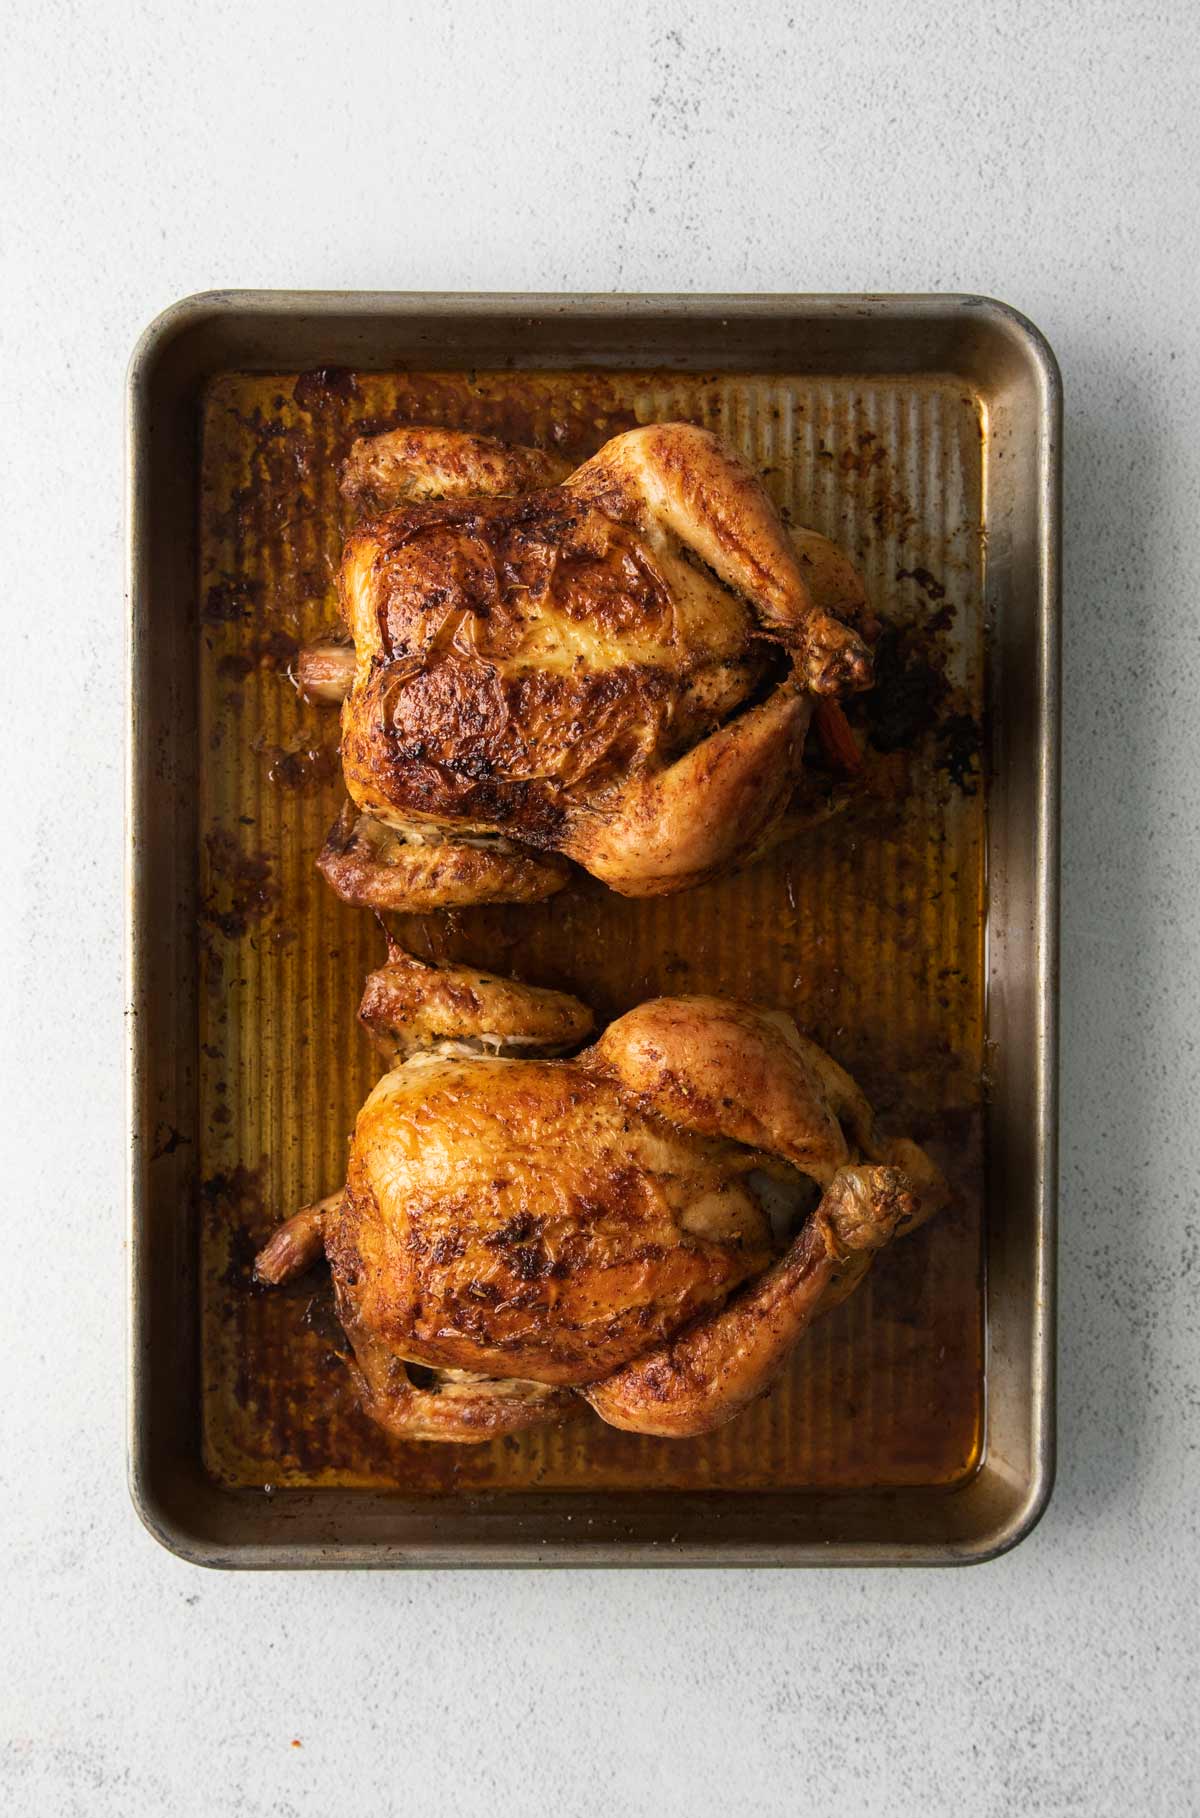 roasted hens on a baking sheet.